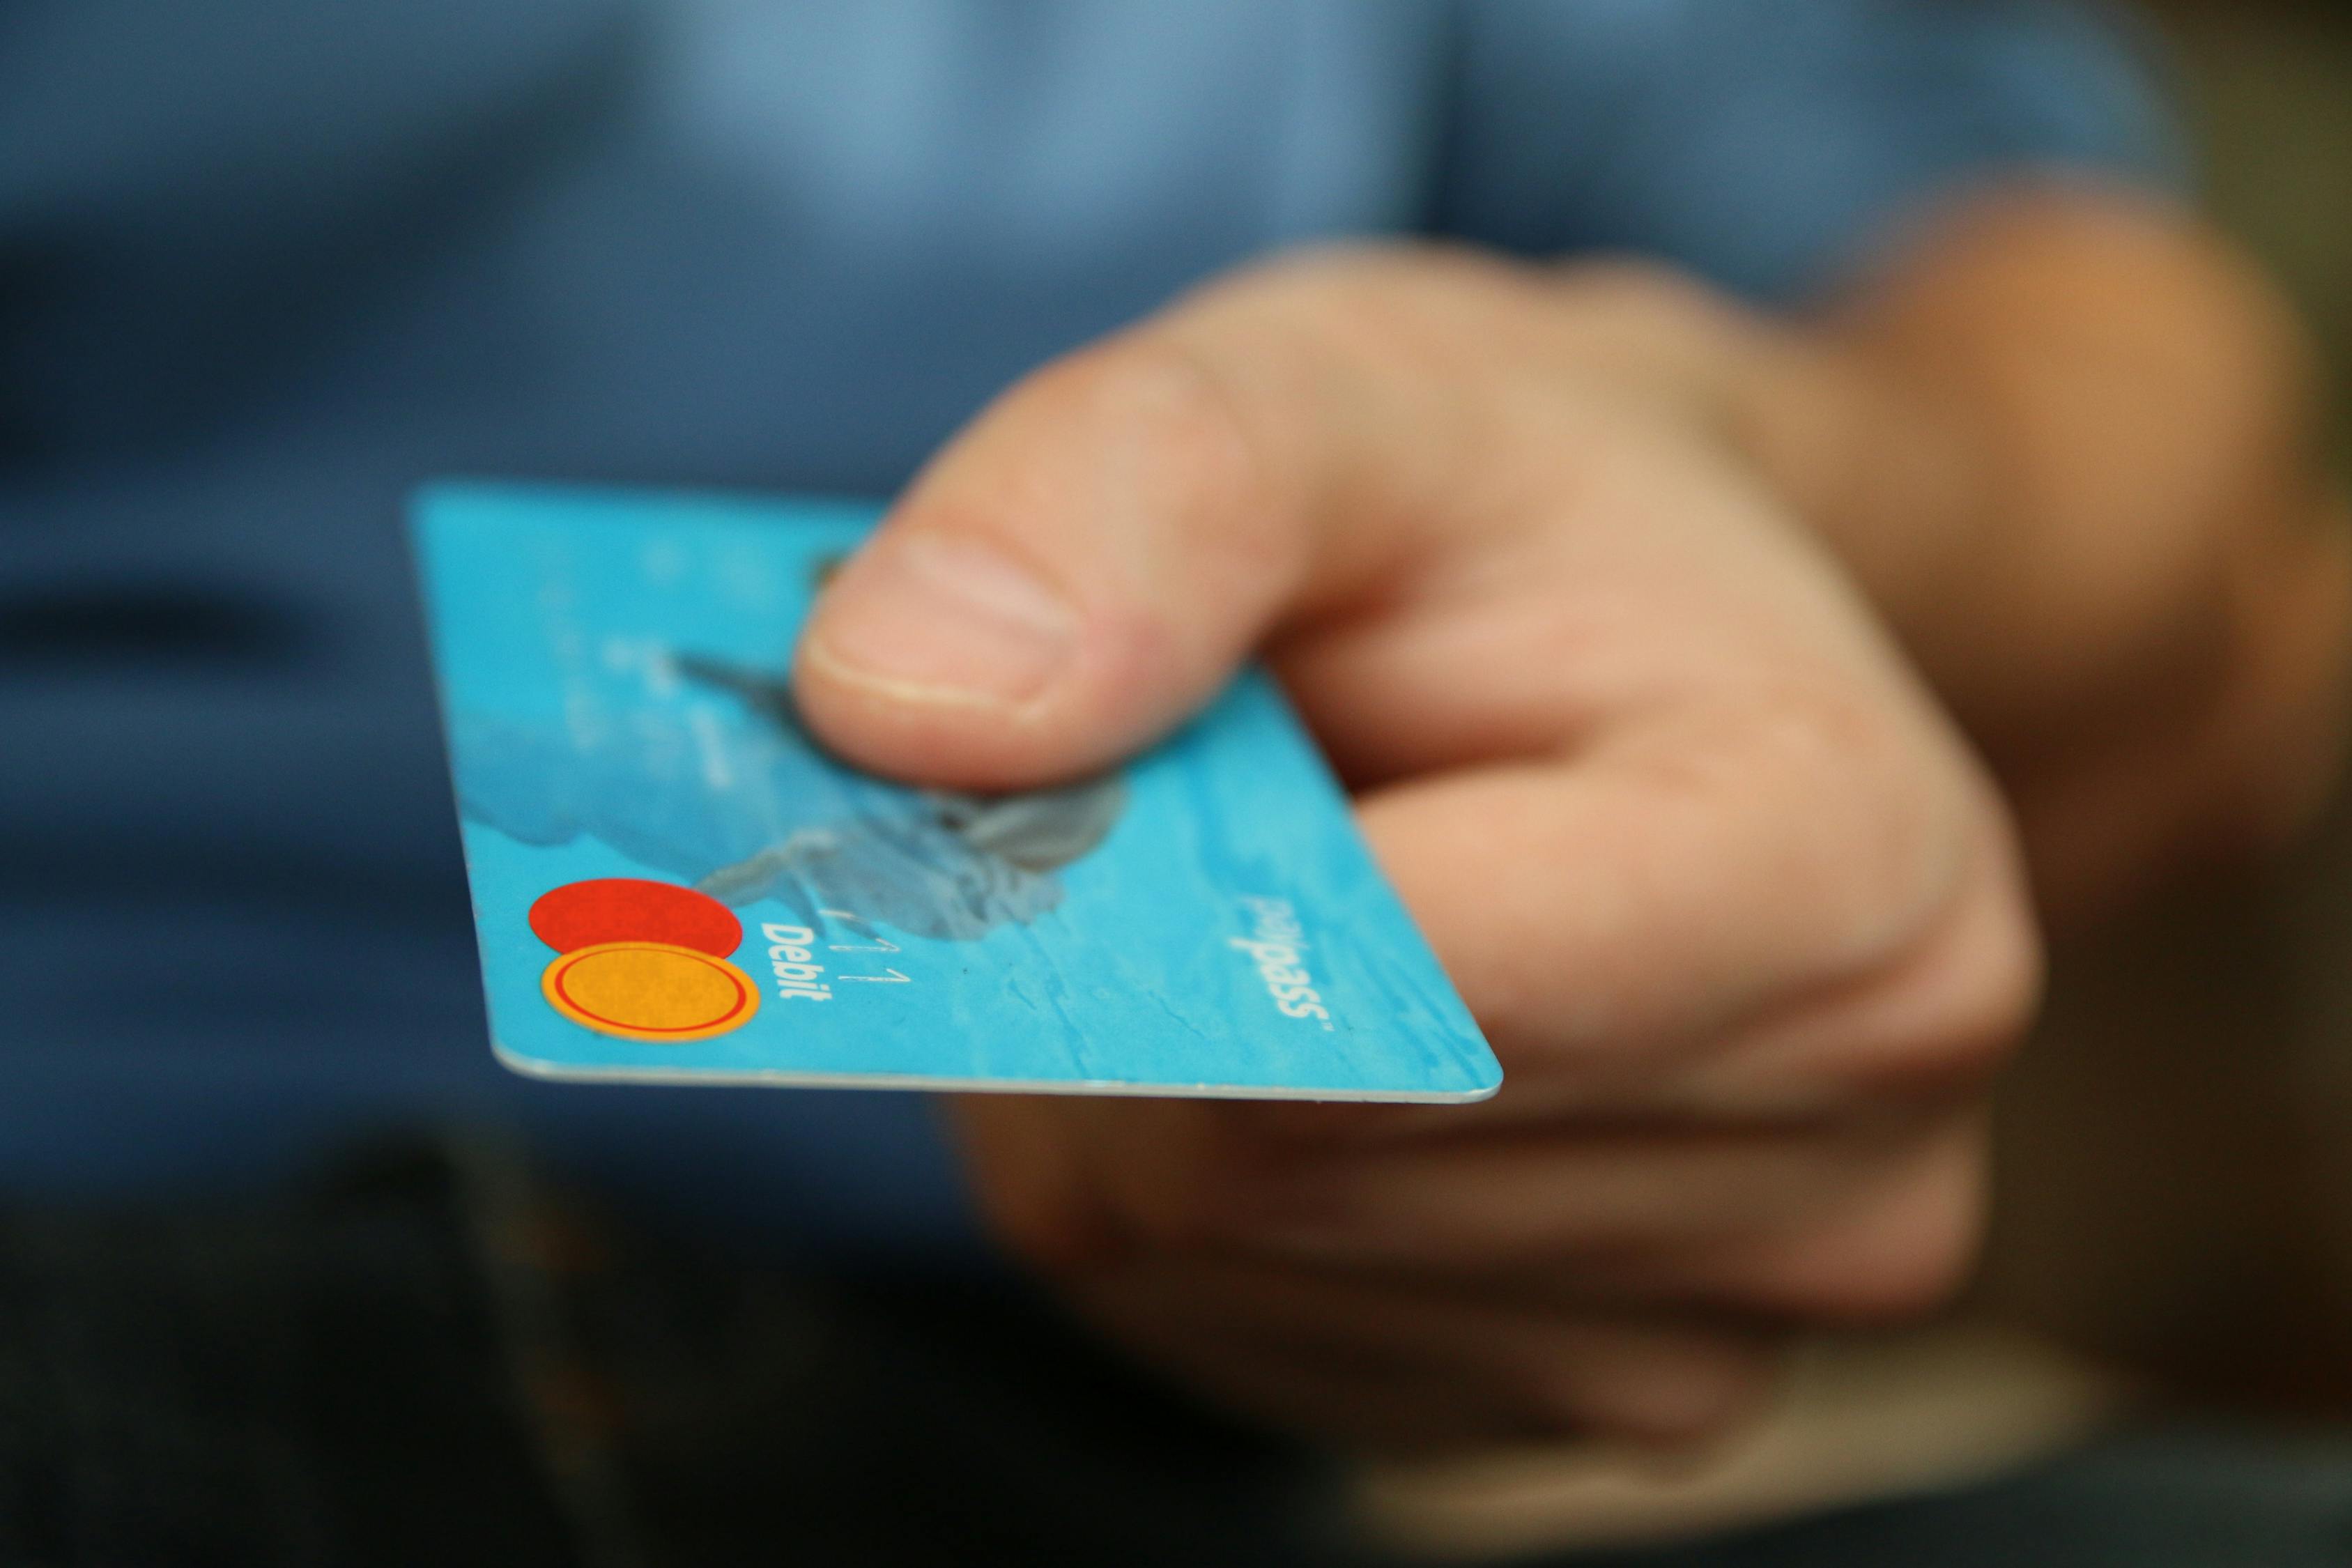 Close up photo of person holding bank card. 